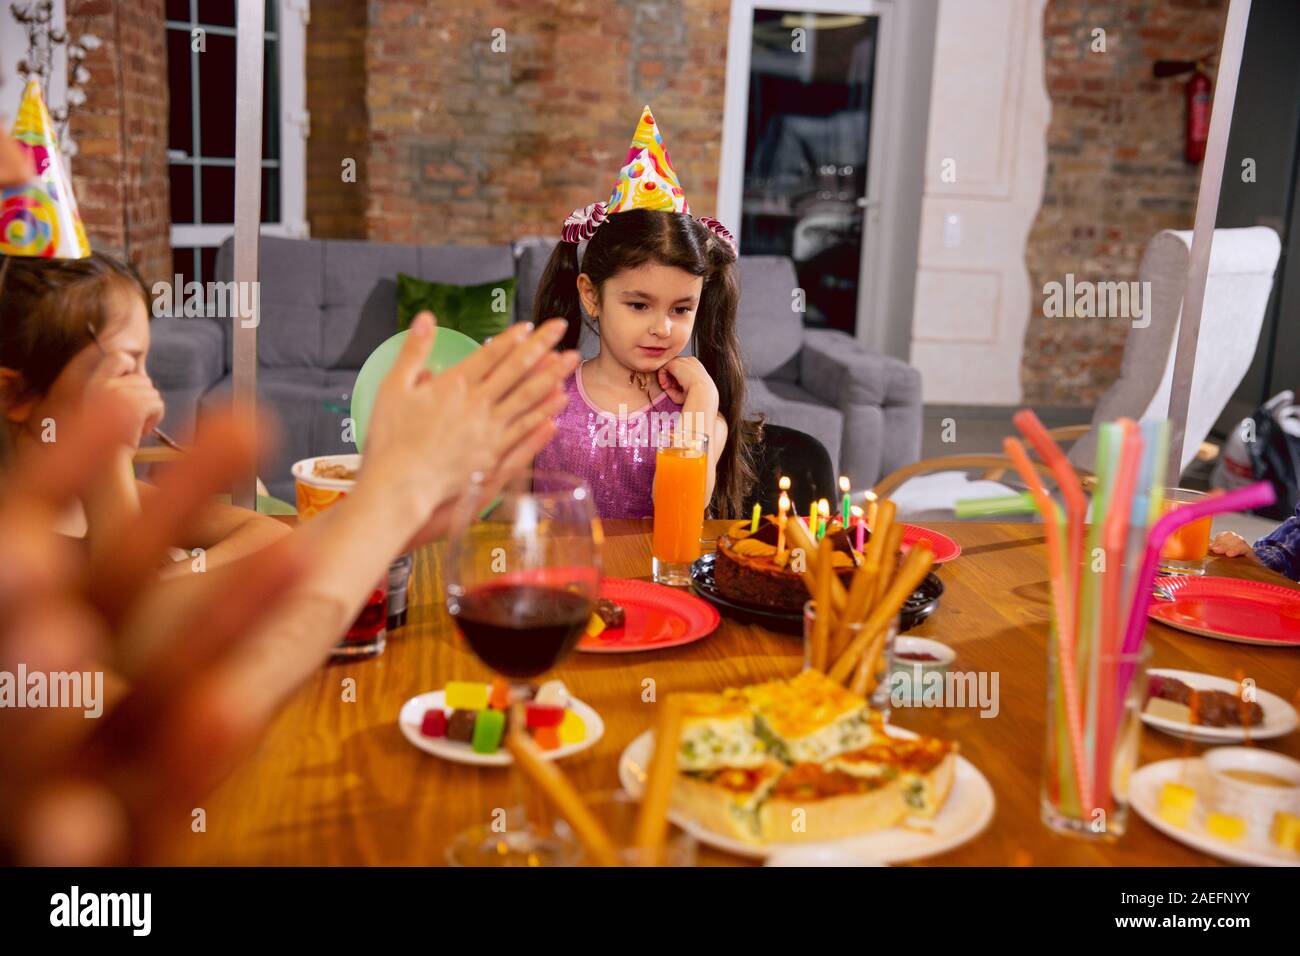 Little happy girl celebrating a birthday at home. Friends eating cake and drinking juice while greeting and having fun children. Celebration, family, party, home, childhood, parenthood concept. Stock Photo